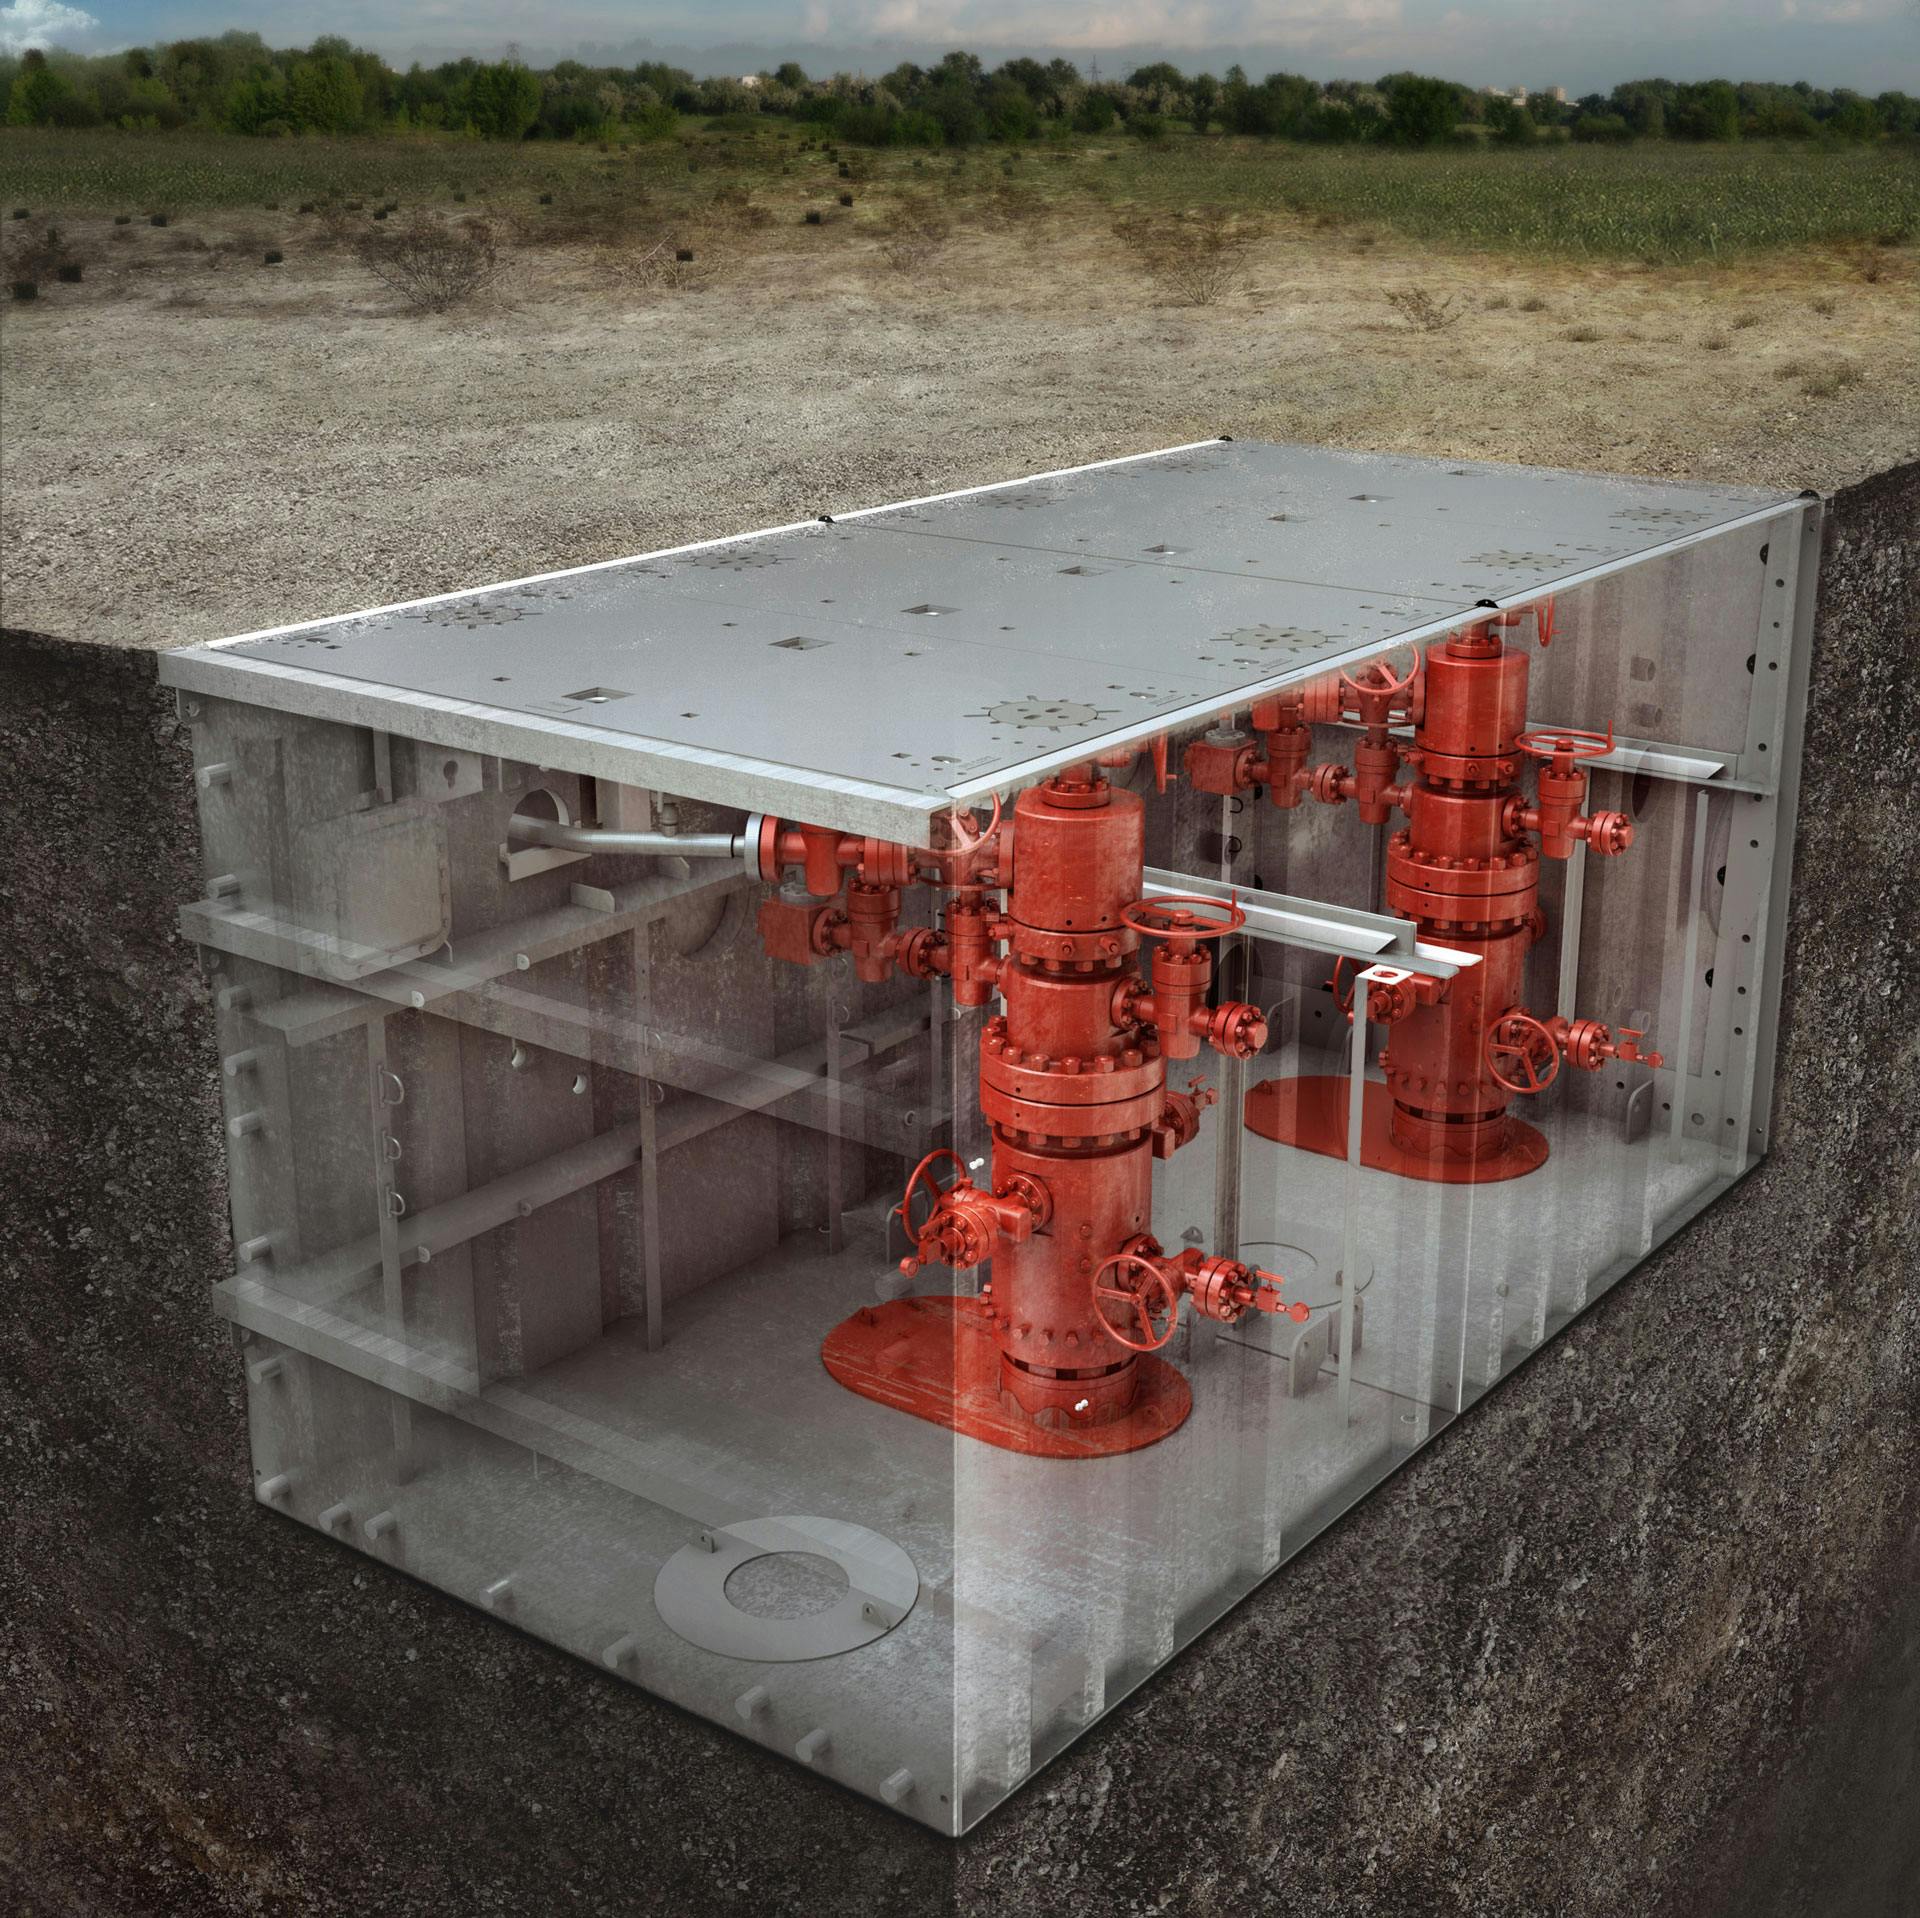 Render of a containment well cellar install, underground